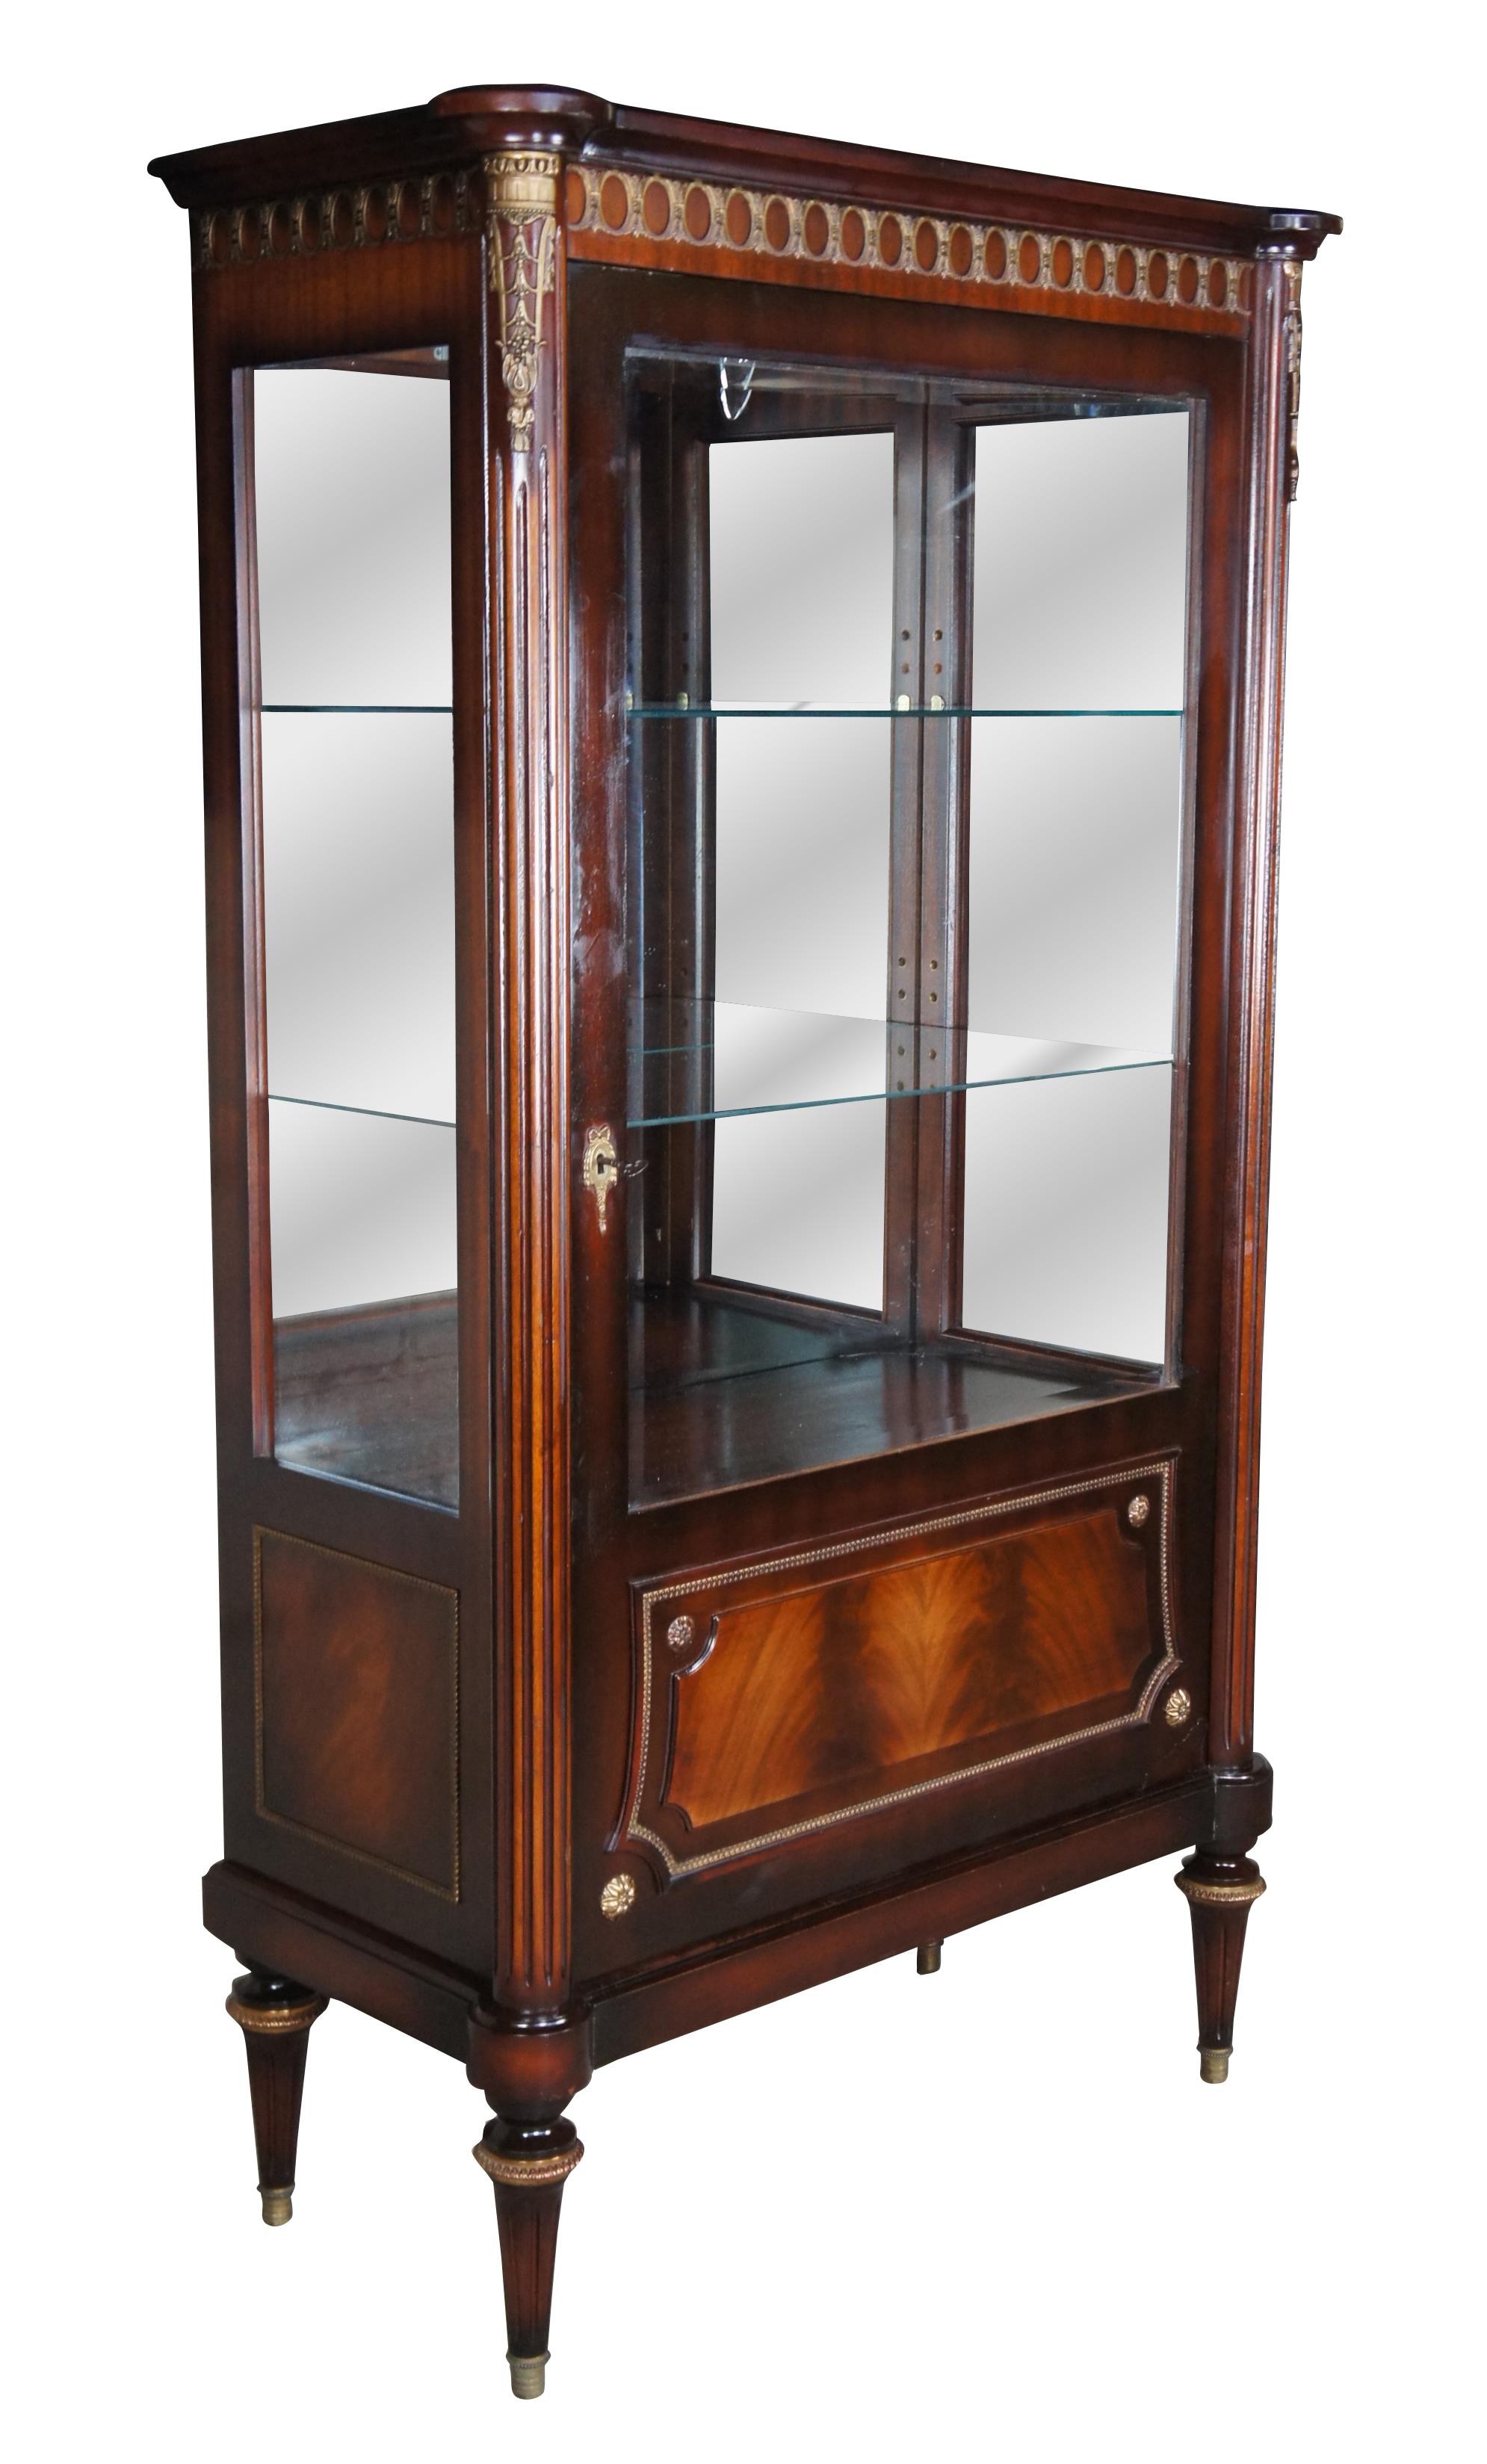 Vintage French Louis XVI inspired display cabinet. Made in Cairo Egypt (Arabska Republika Egiptu) by Abbas, circa 1972. Made mahogany with crotch mahogany front. Features ornate brass ormolu, reeded columns and turned tapered legs with brass caps.